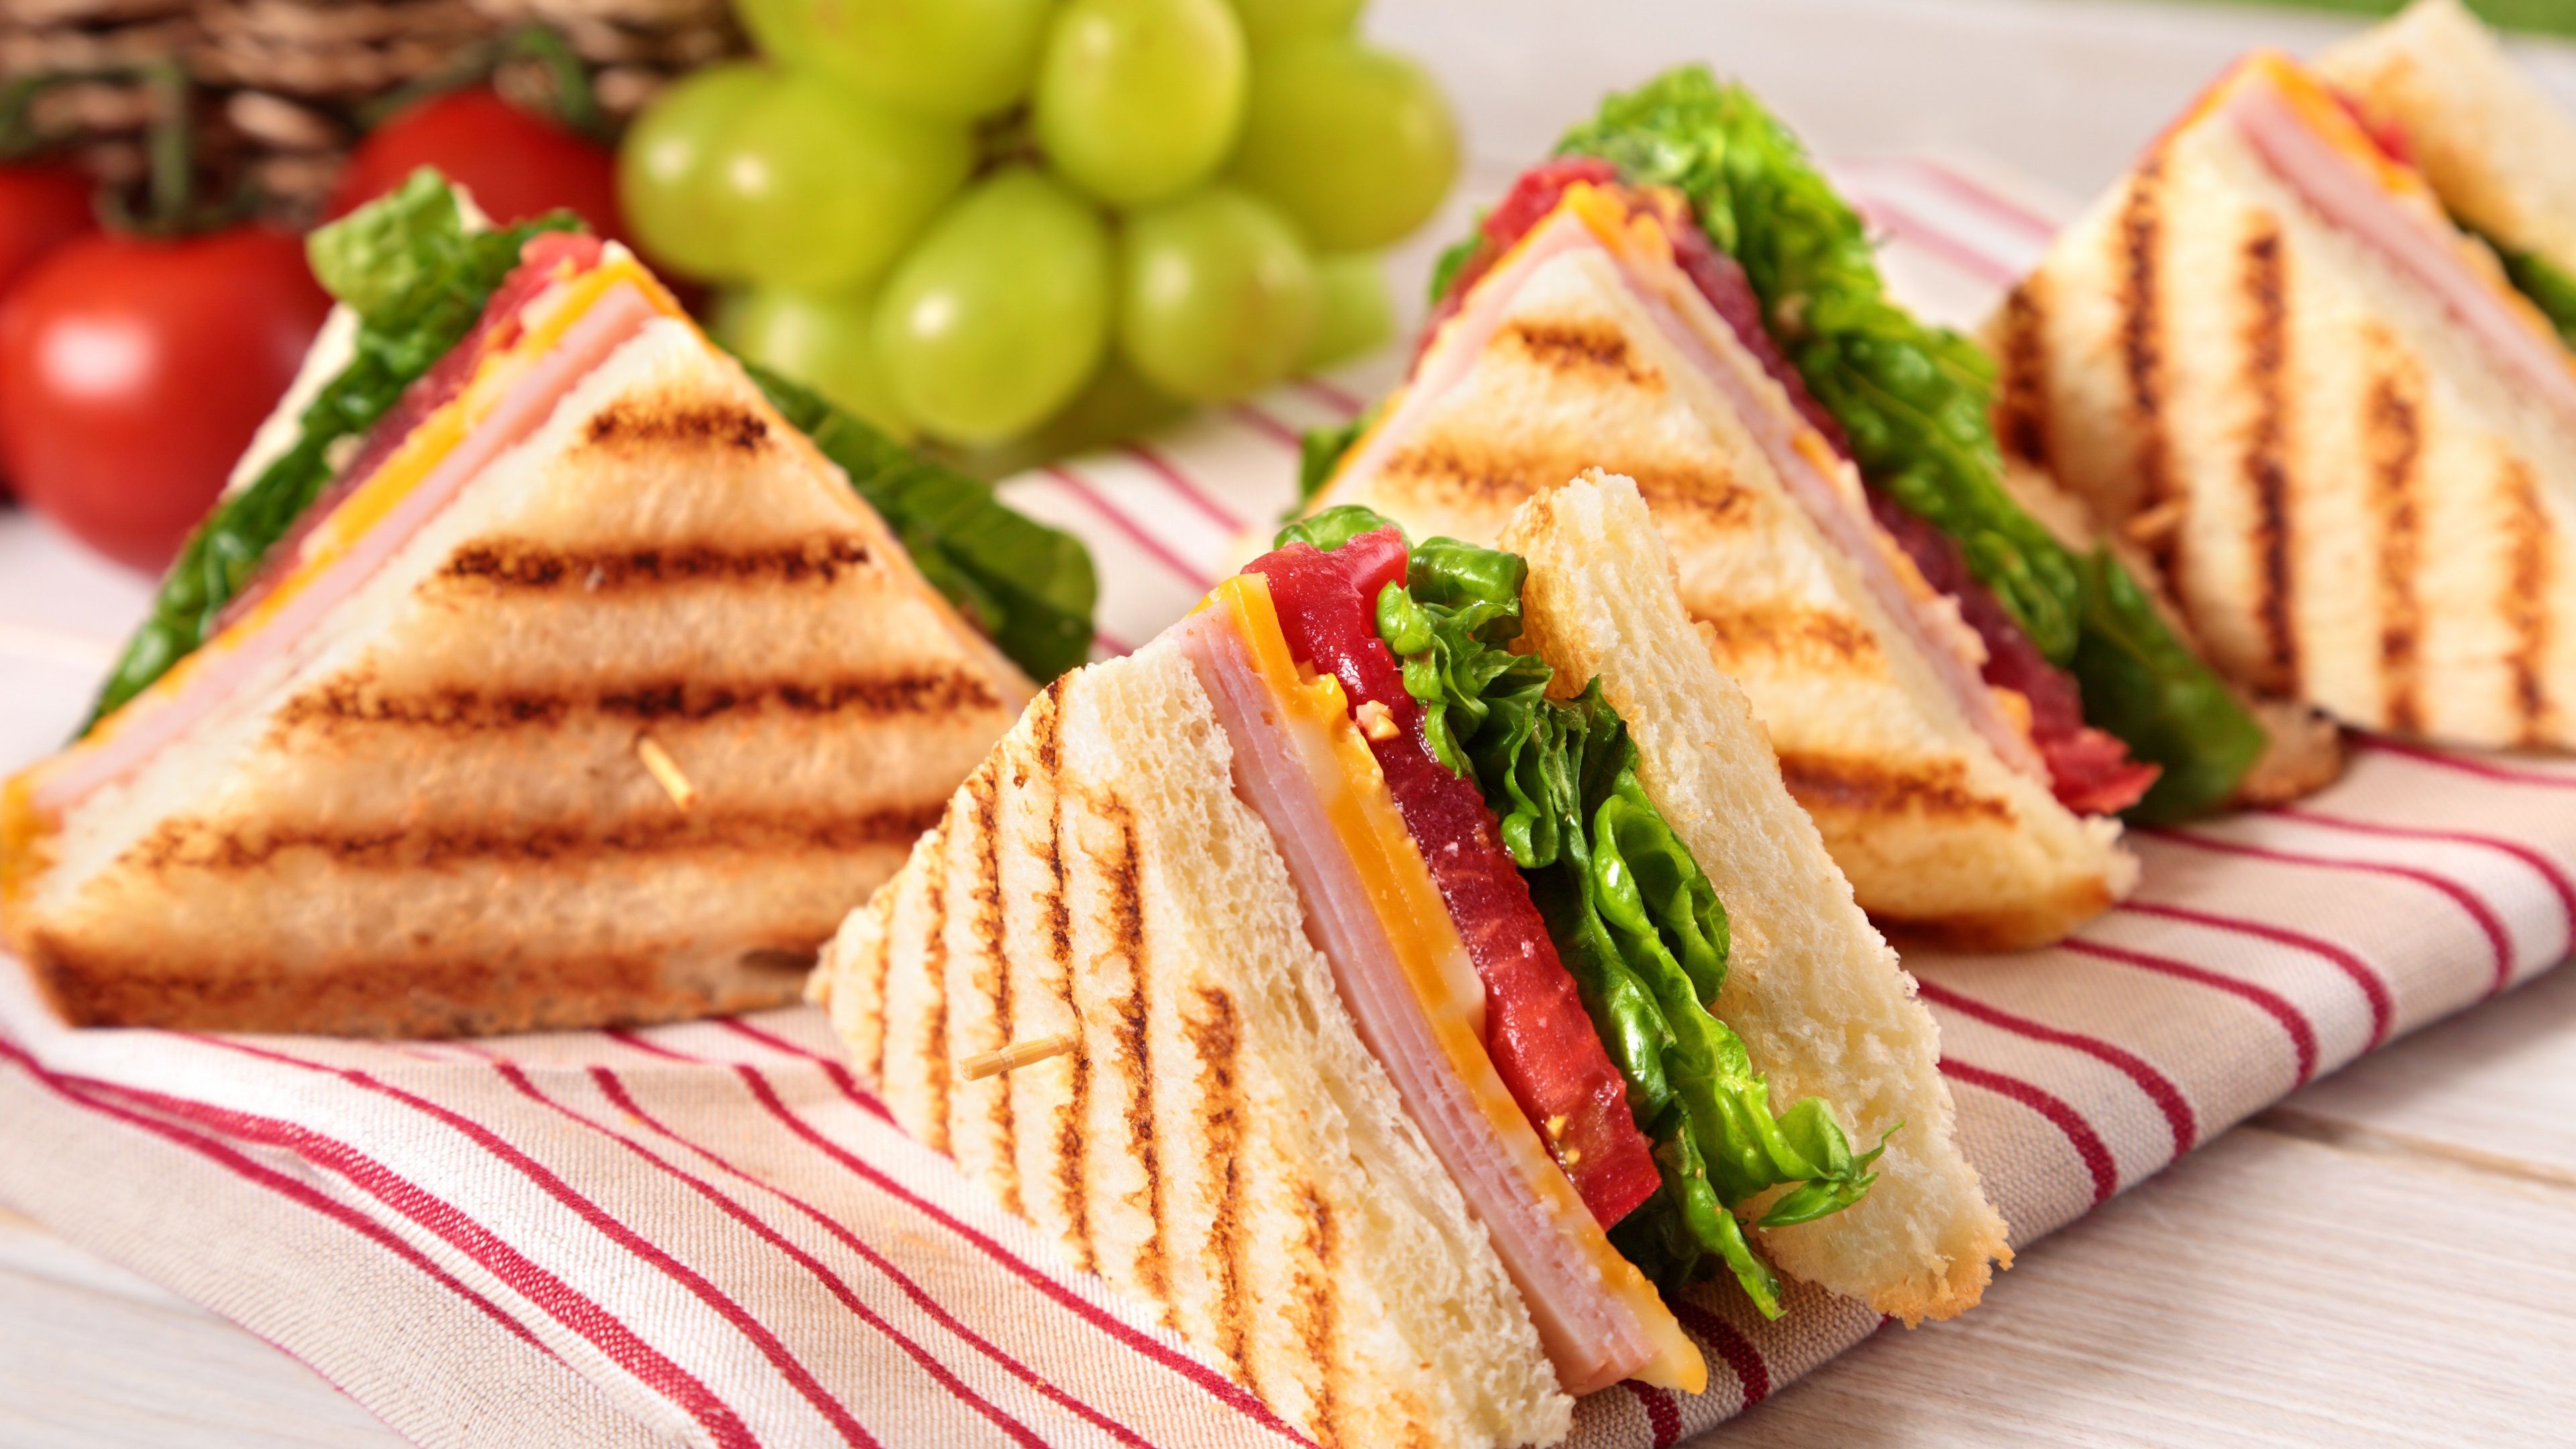 Wallpaper Delicious food, sandwiches, ham, toast 3840x2160 UHD 4K Picture, Image